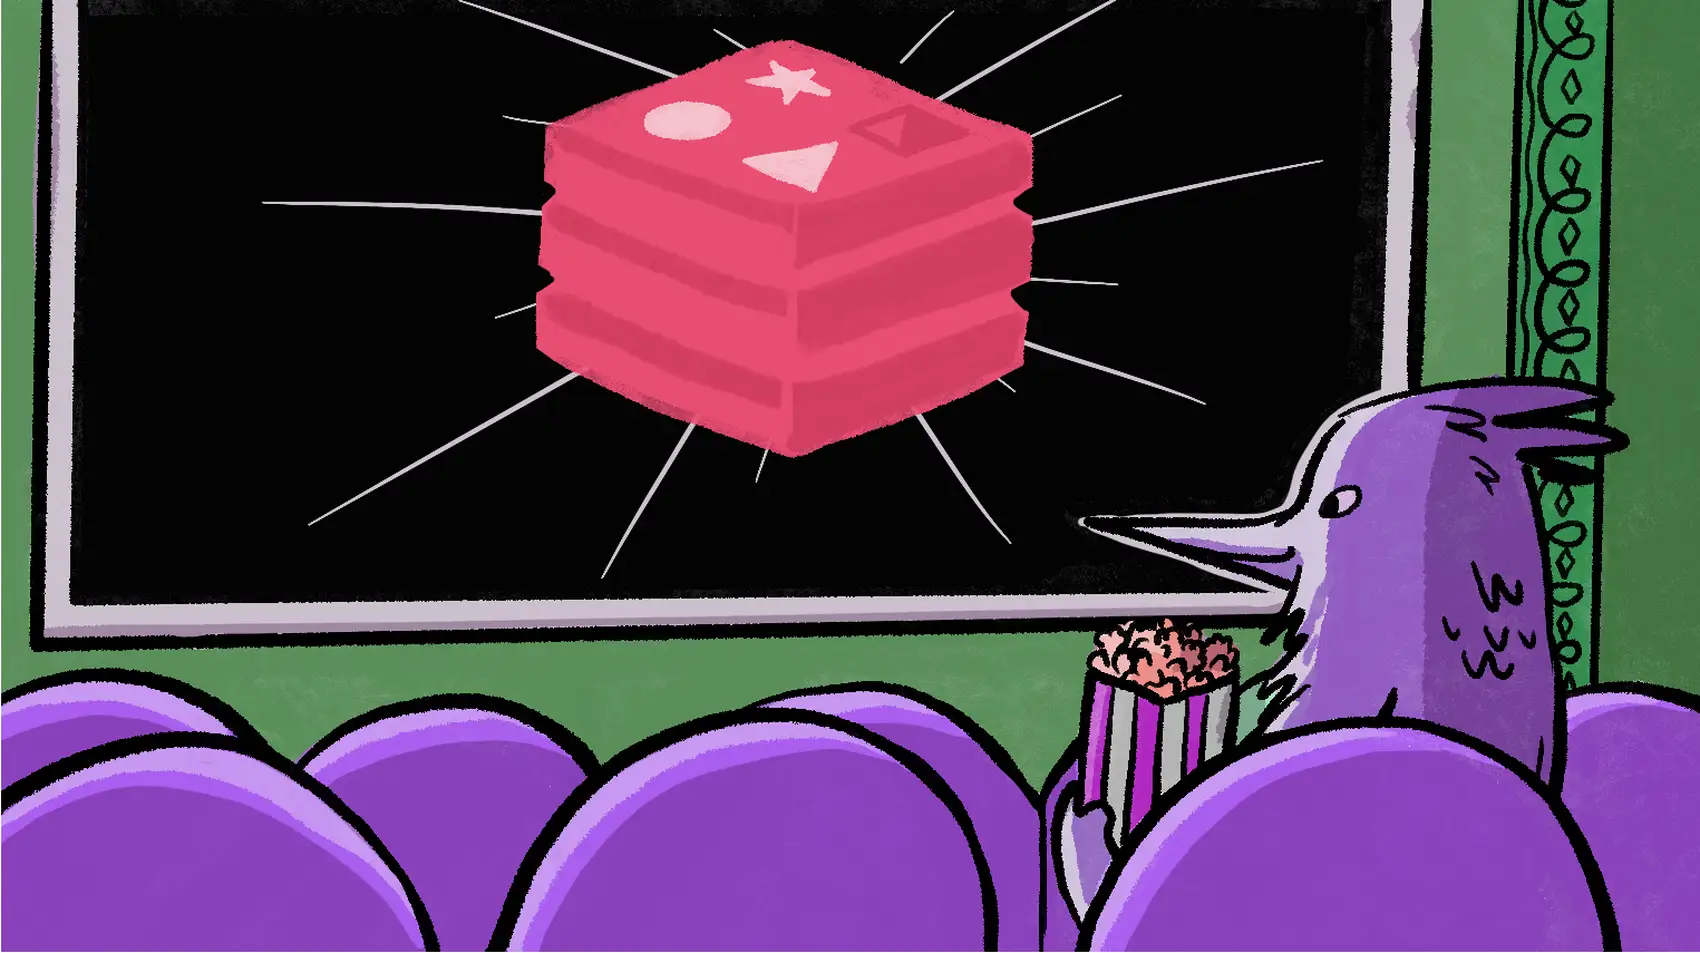 A purple bird holding a popcorn bucket at the cinema looking at the screen with the shinning Redis logo.